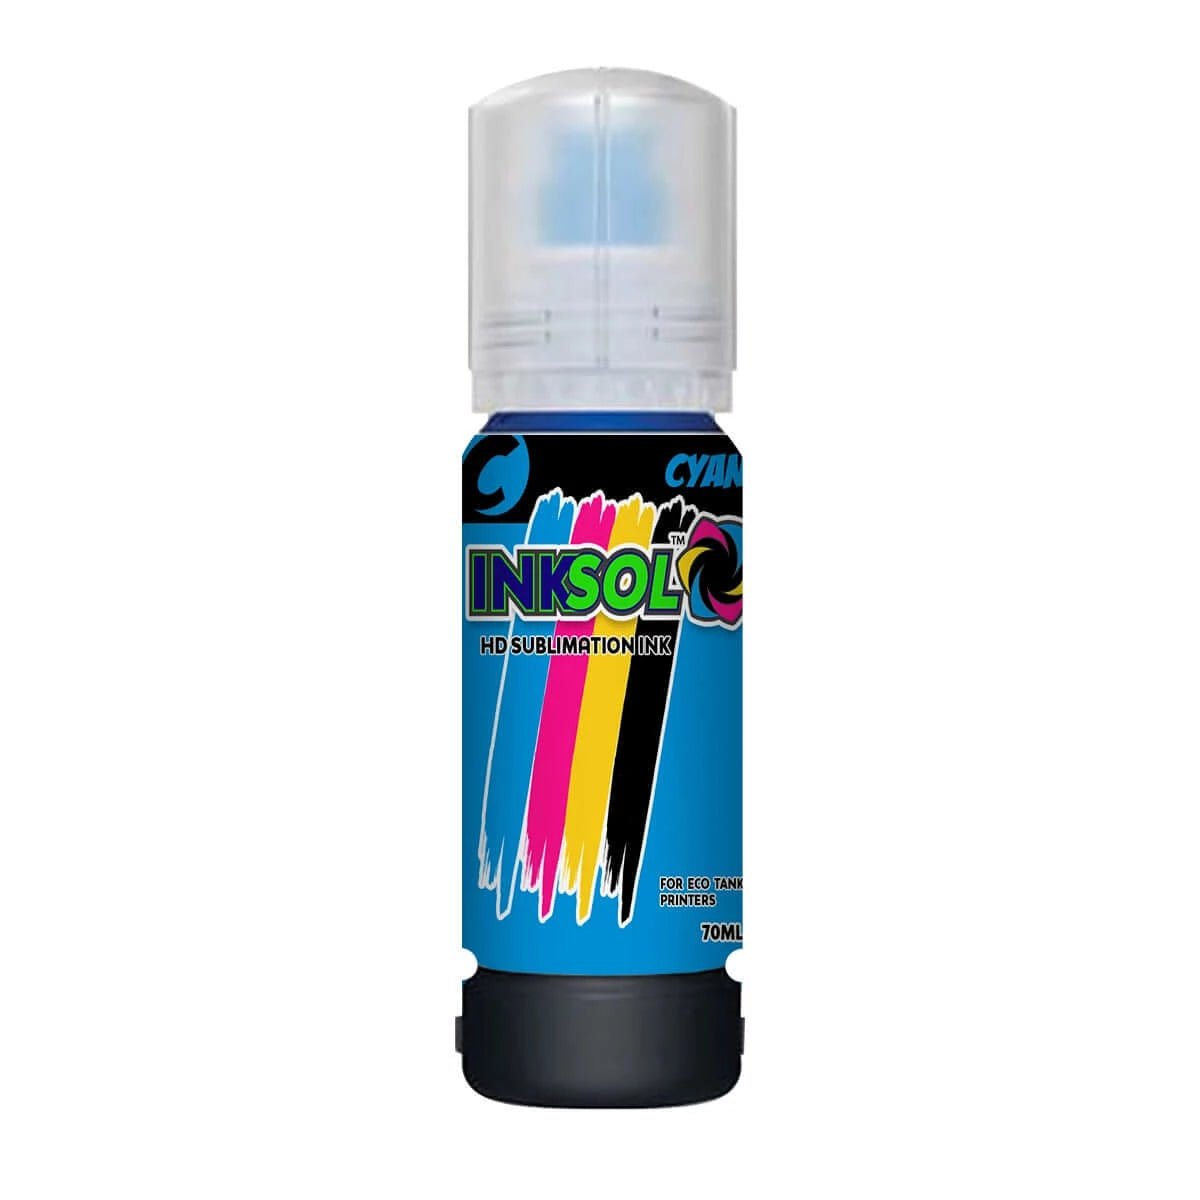 InkSol® High Definition Sublimation Ink - Cyan